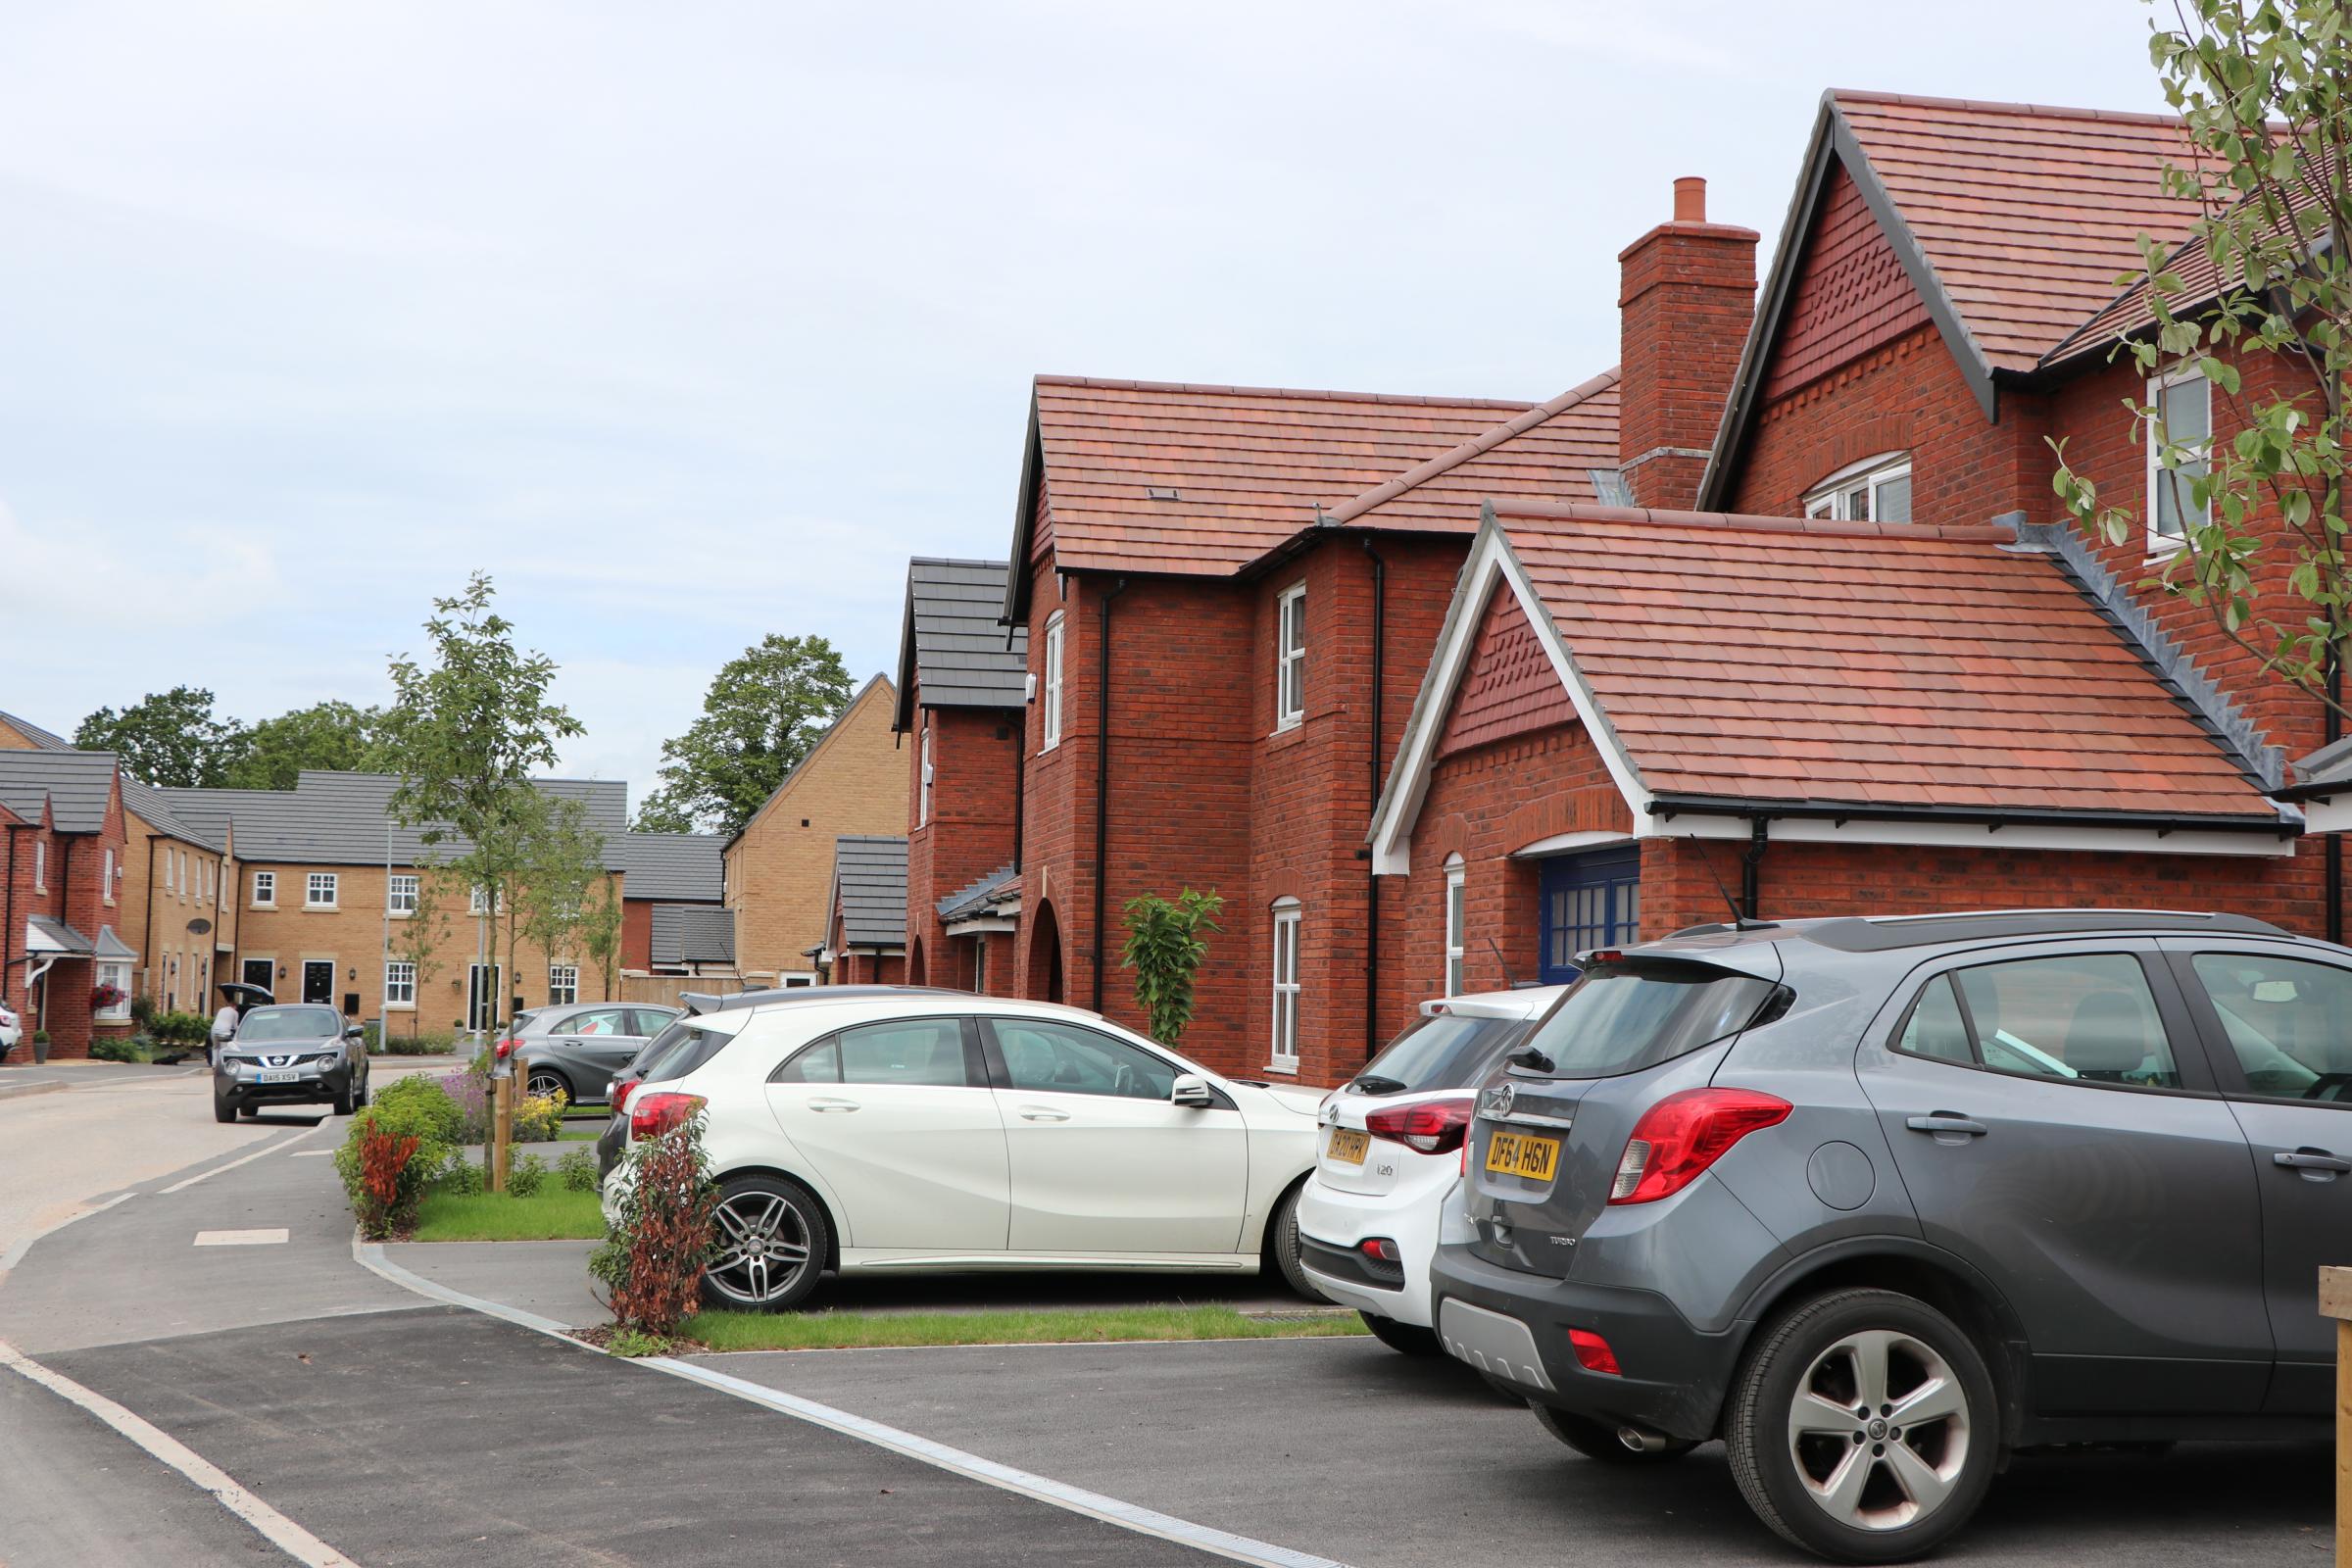 Demand has been high for new build homes on the Stanley Gardens development